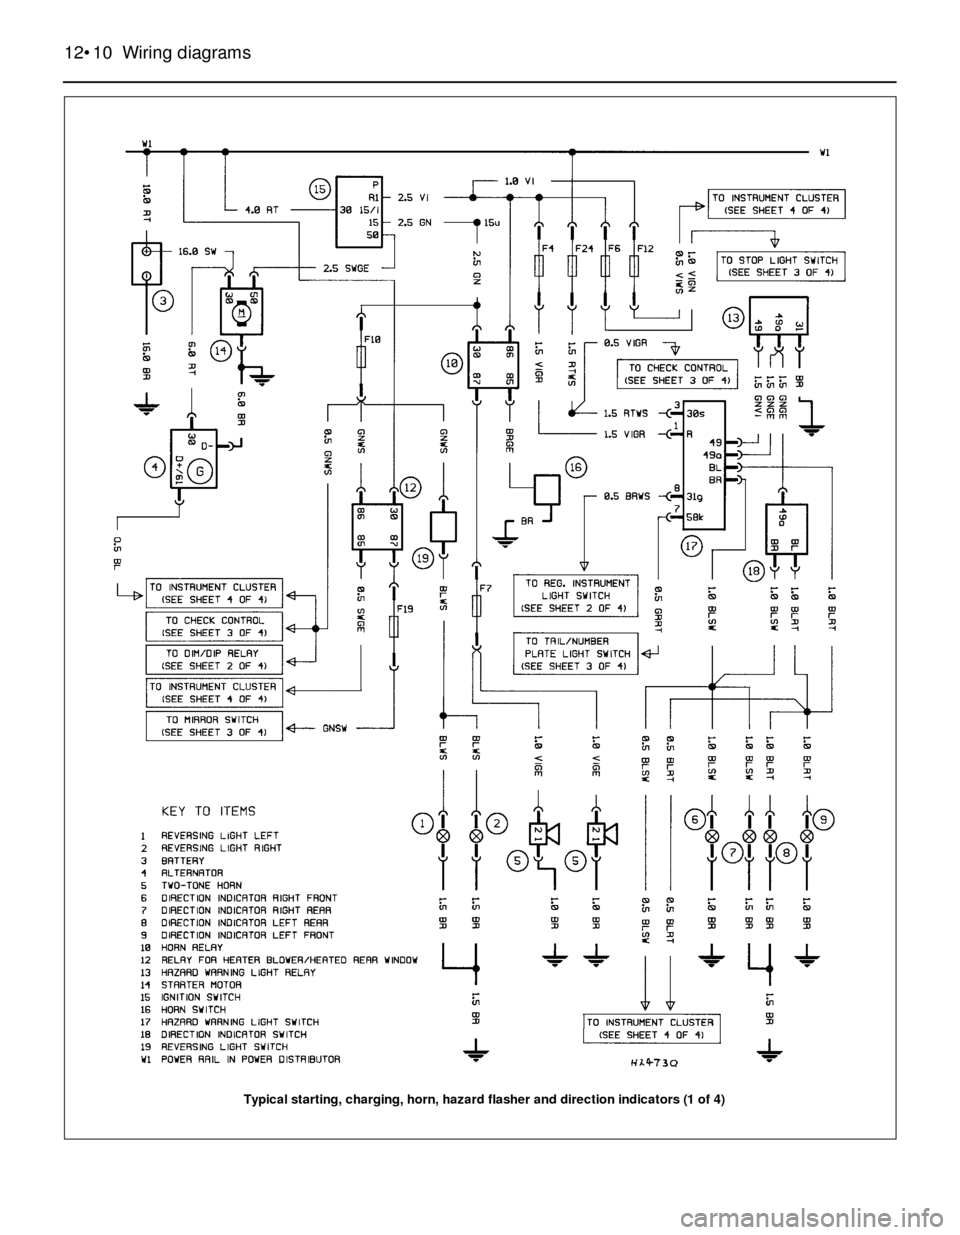 BMW 3 SERIES 1986 E30 Workshop Manual 12•10 Wiring diagrams
Typical starting, charging, horn, hazard flasher and direction indicators (1 of 4) 